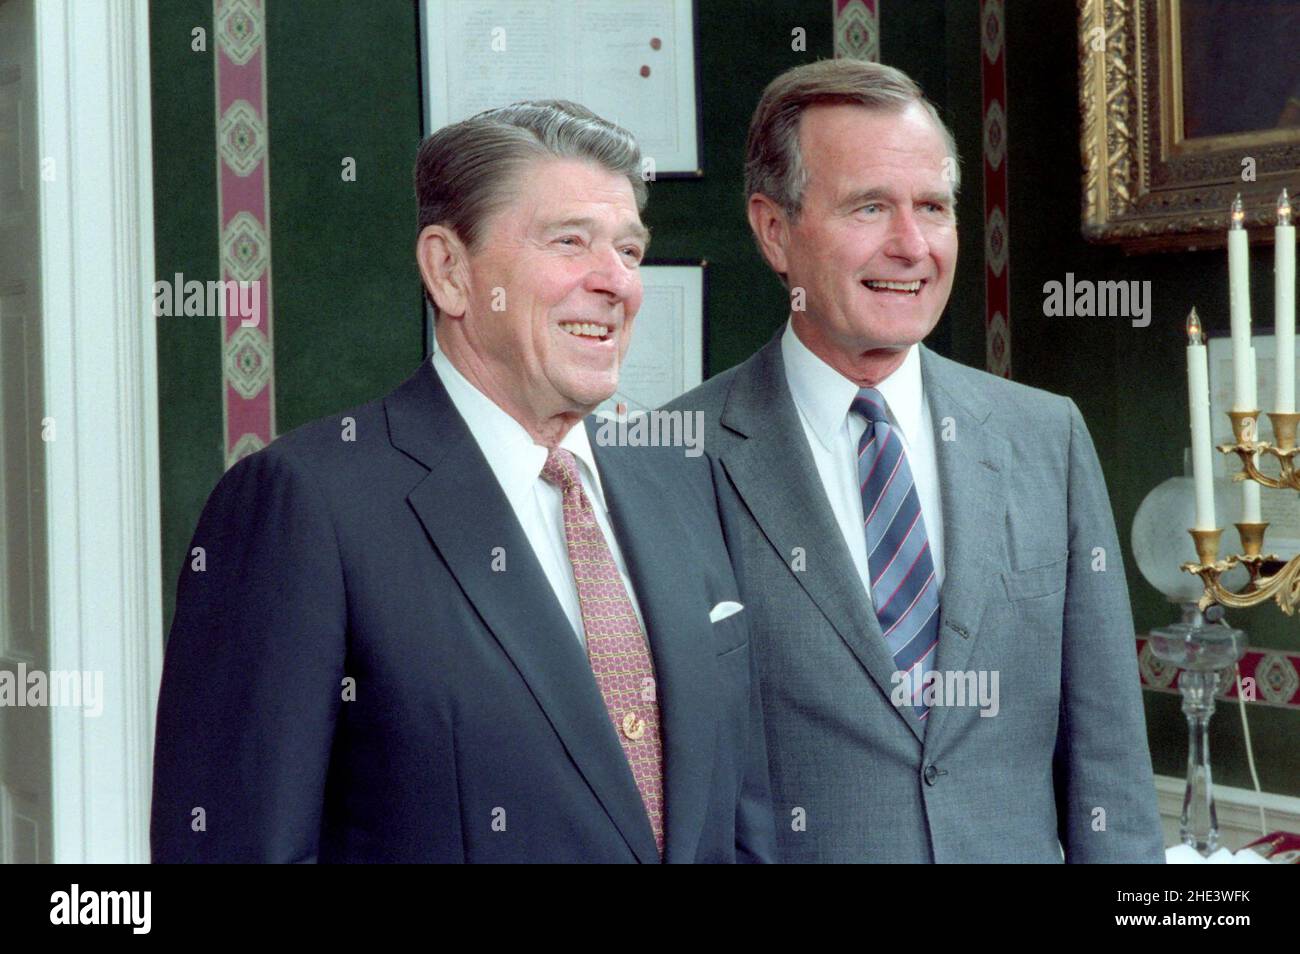 Ronald Reagan and George H. W. Bush in The Treaty Room Posing for The 1987 Cabinet Photo. Stock Photo